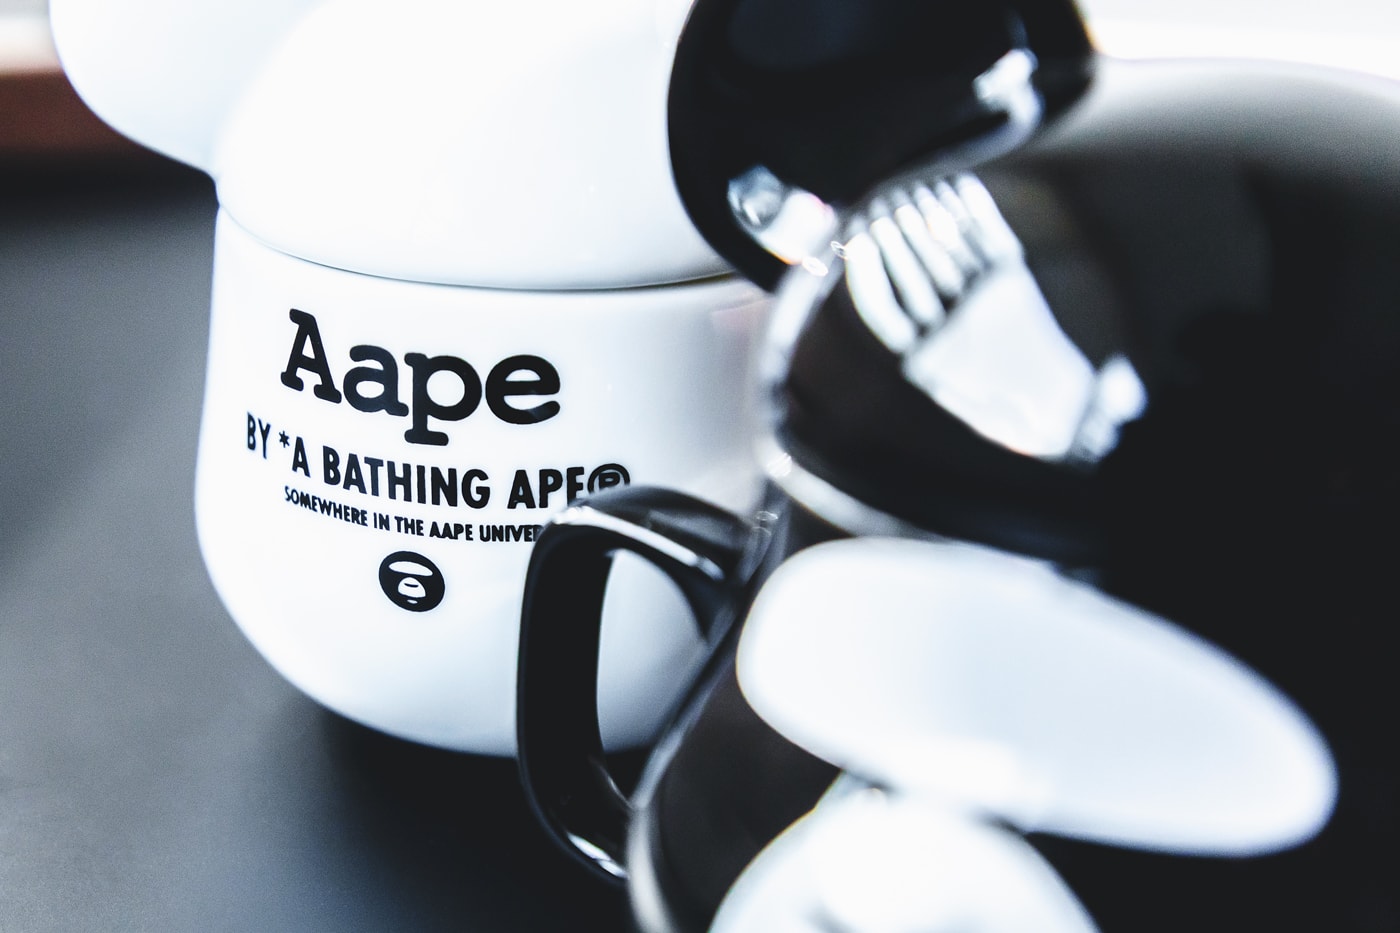 AAPE x Baby Milo Store x Medicom Toy BE@RMUGS a bathing ape BAPE release drop info pricing stockist somewhere in the aape universe